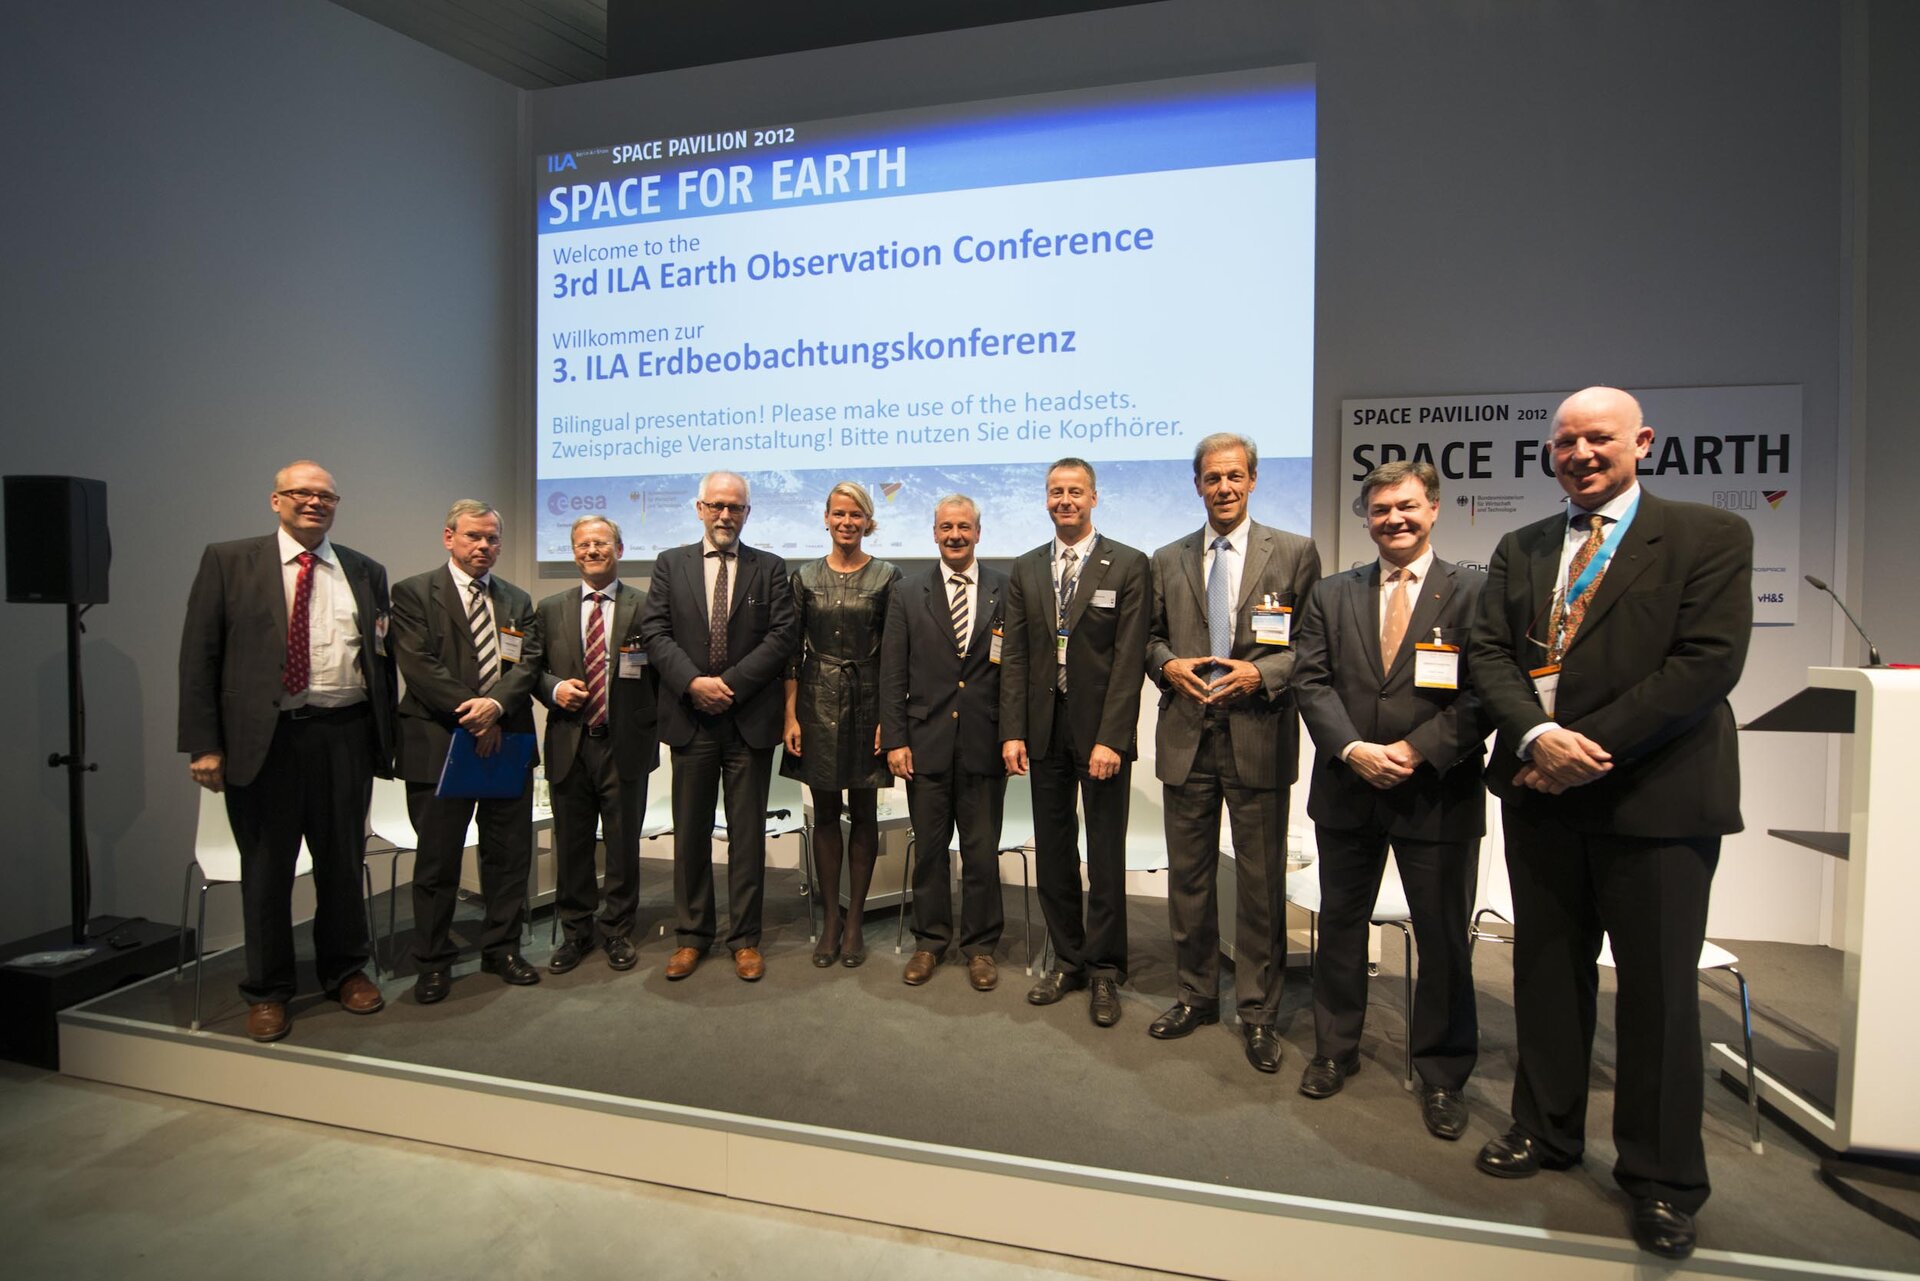 Speakers at the Earth Observation Conference